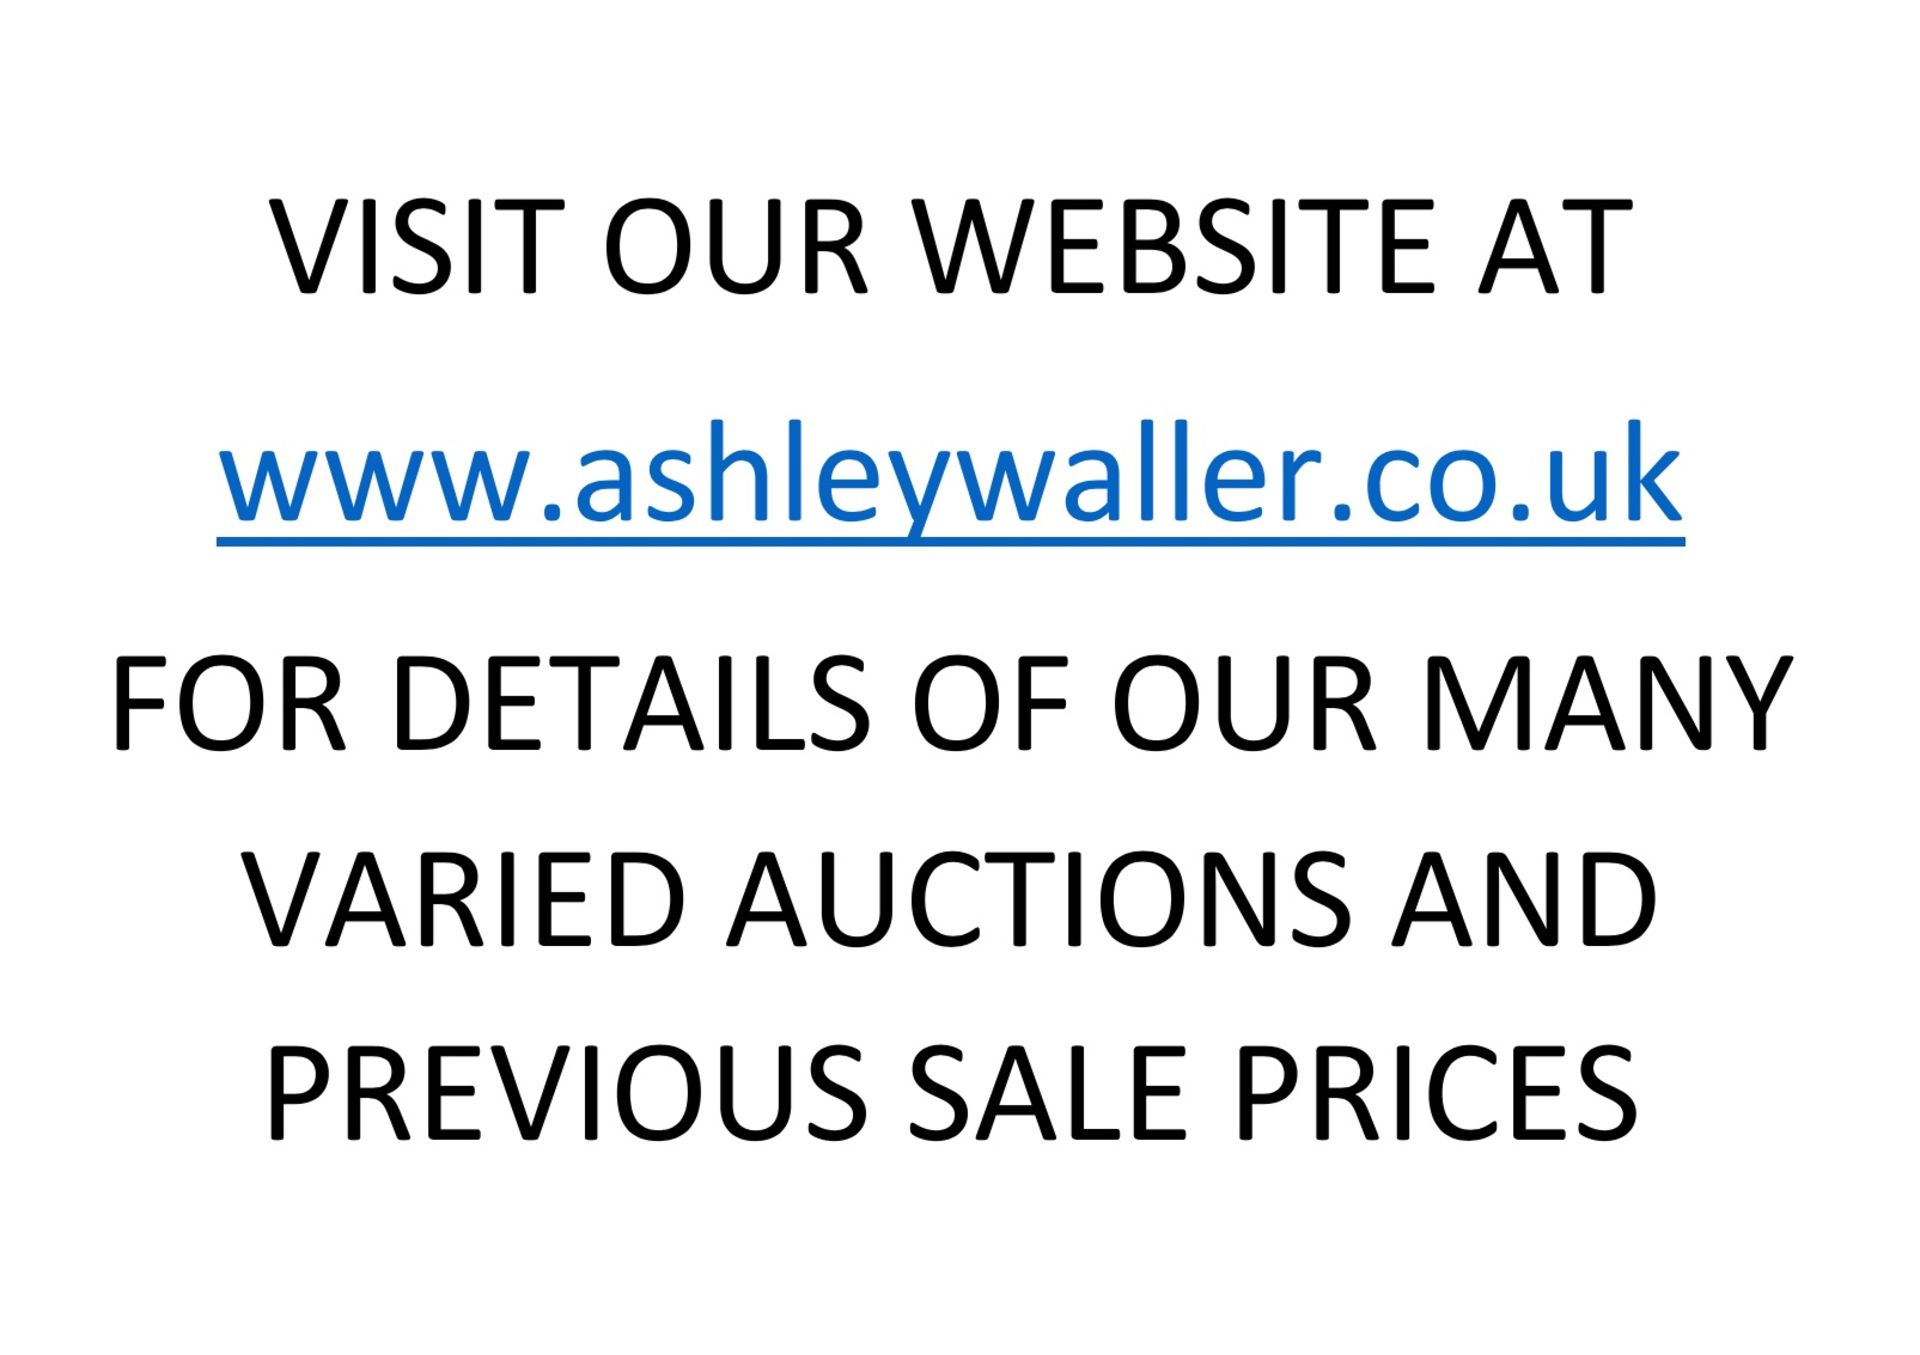 END OF SALE, THANK YOU FOR YOUR BIDDING. OUR NEXT SALE IS ON THE 4TH AND 5TH JANUARY